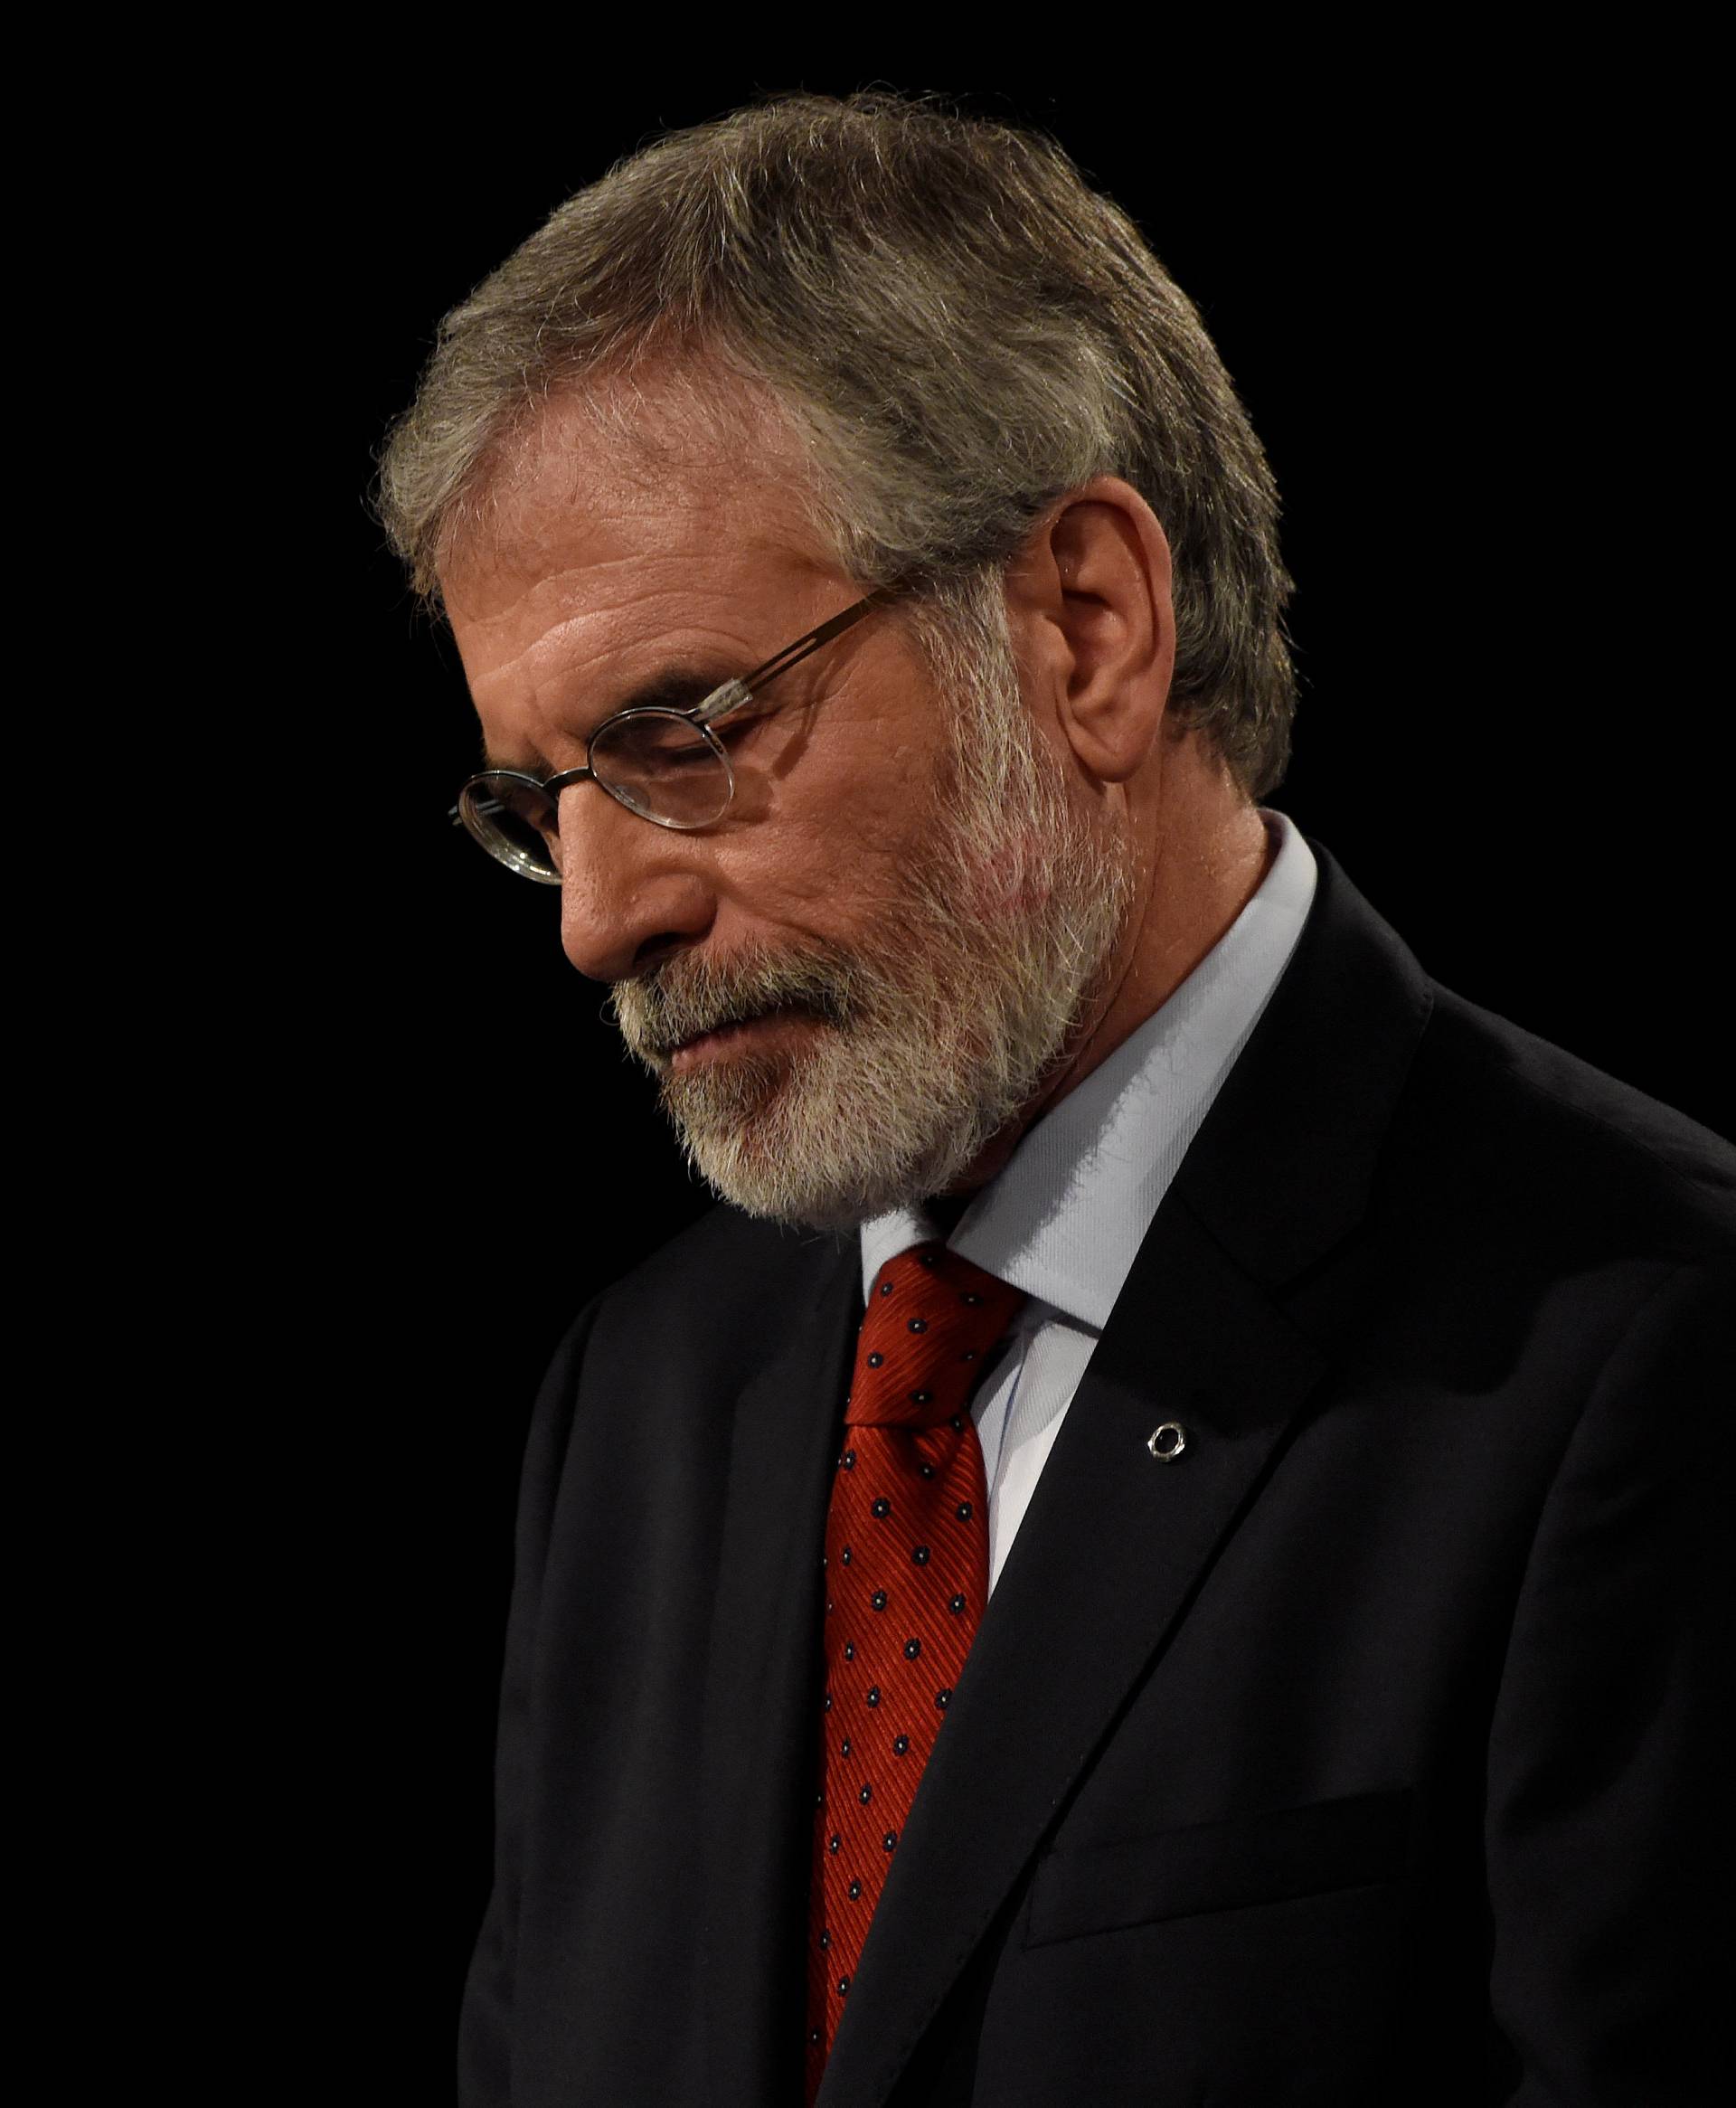 Sinn Fein President Gerry Adams delivers a speech at his party's annual conference in Dublin